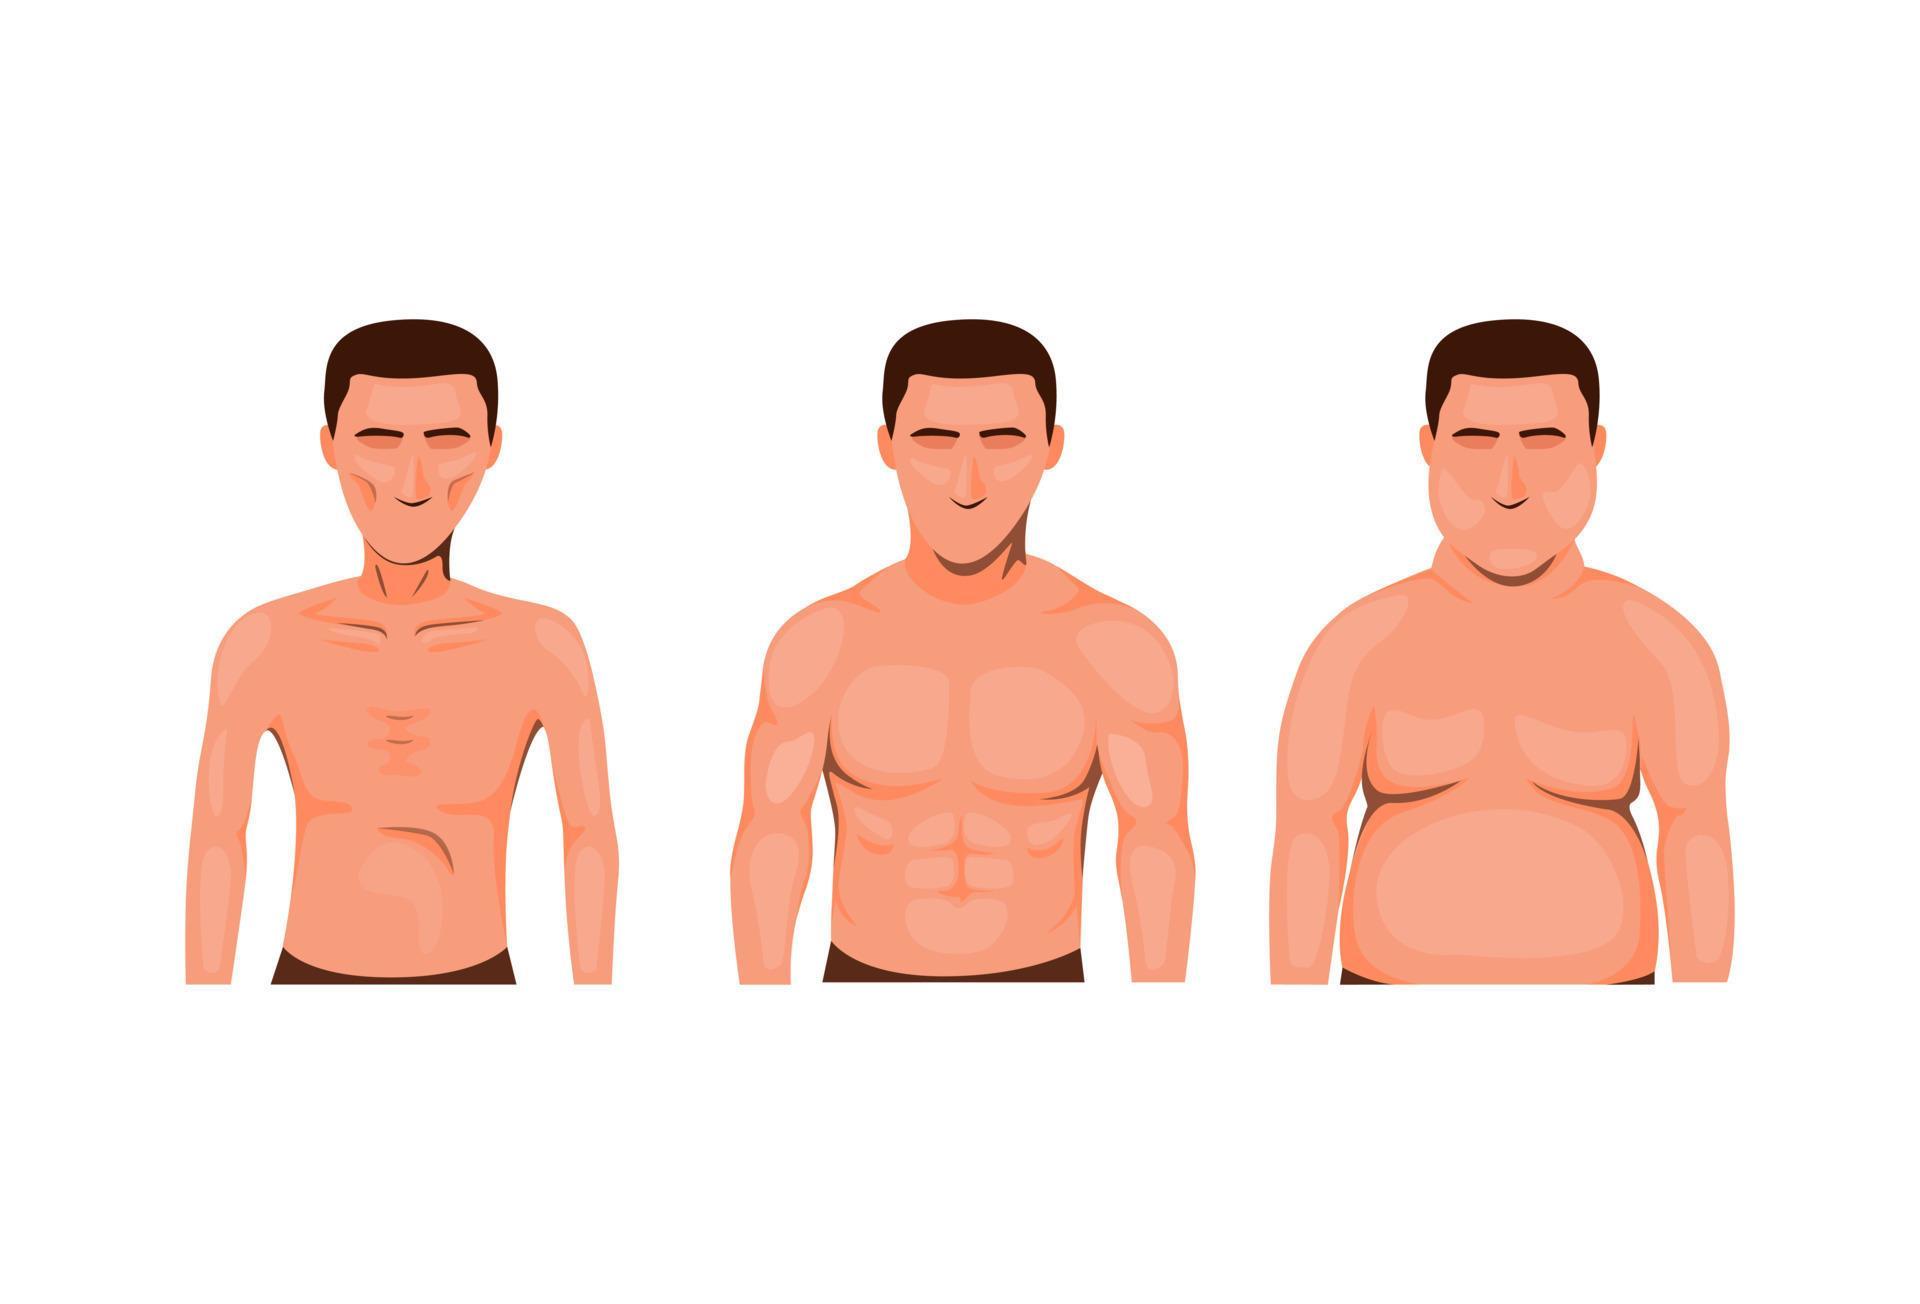 Man Body Type Skinny Fat And Muscle Nutrition Health Symbol Icon Set Concept In Cartoon Illustration Vector Vector Art At Vecteezy